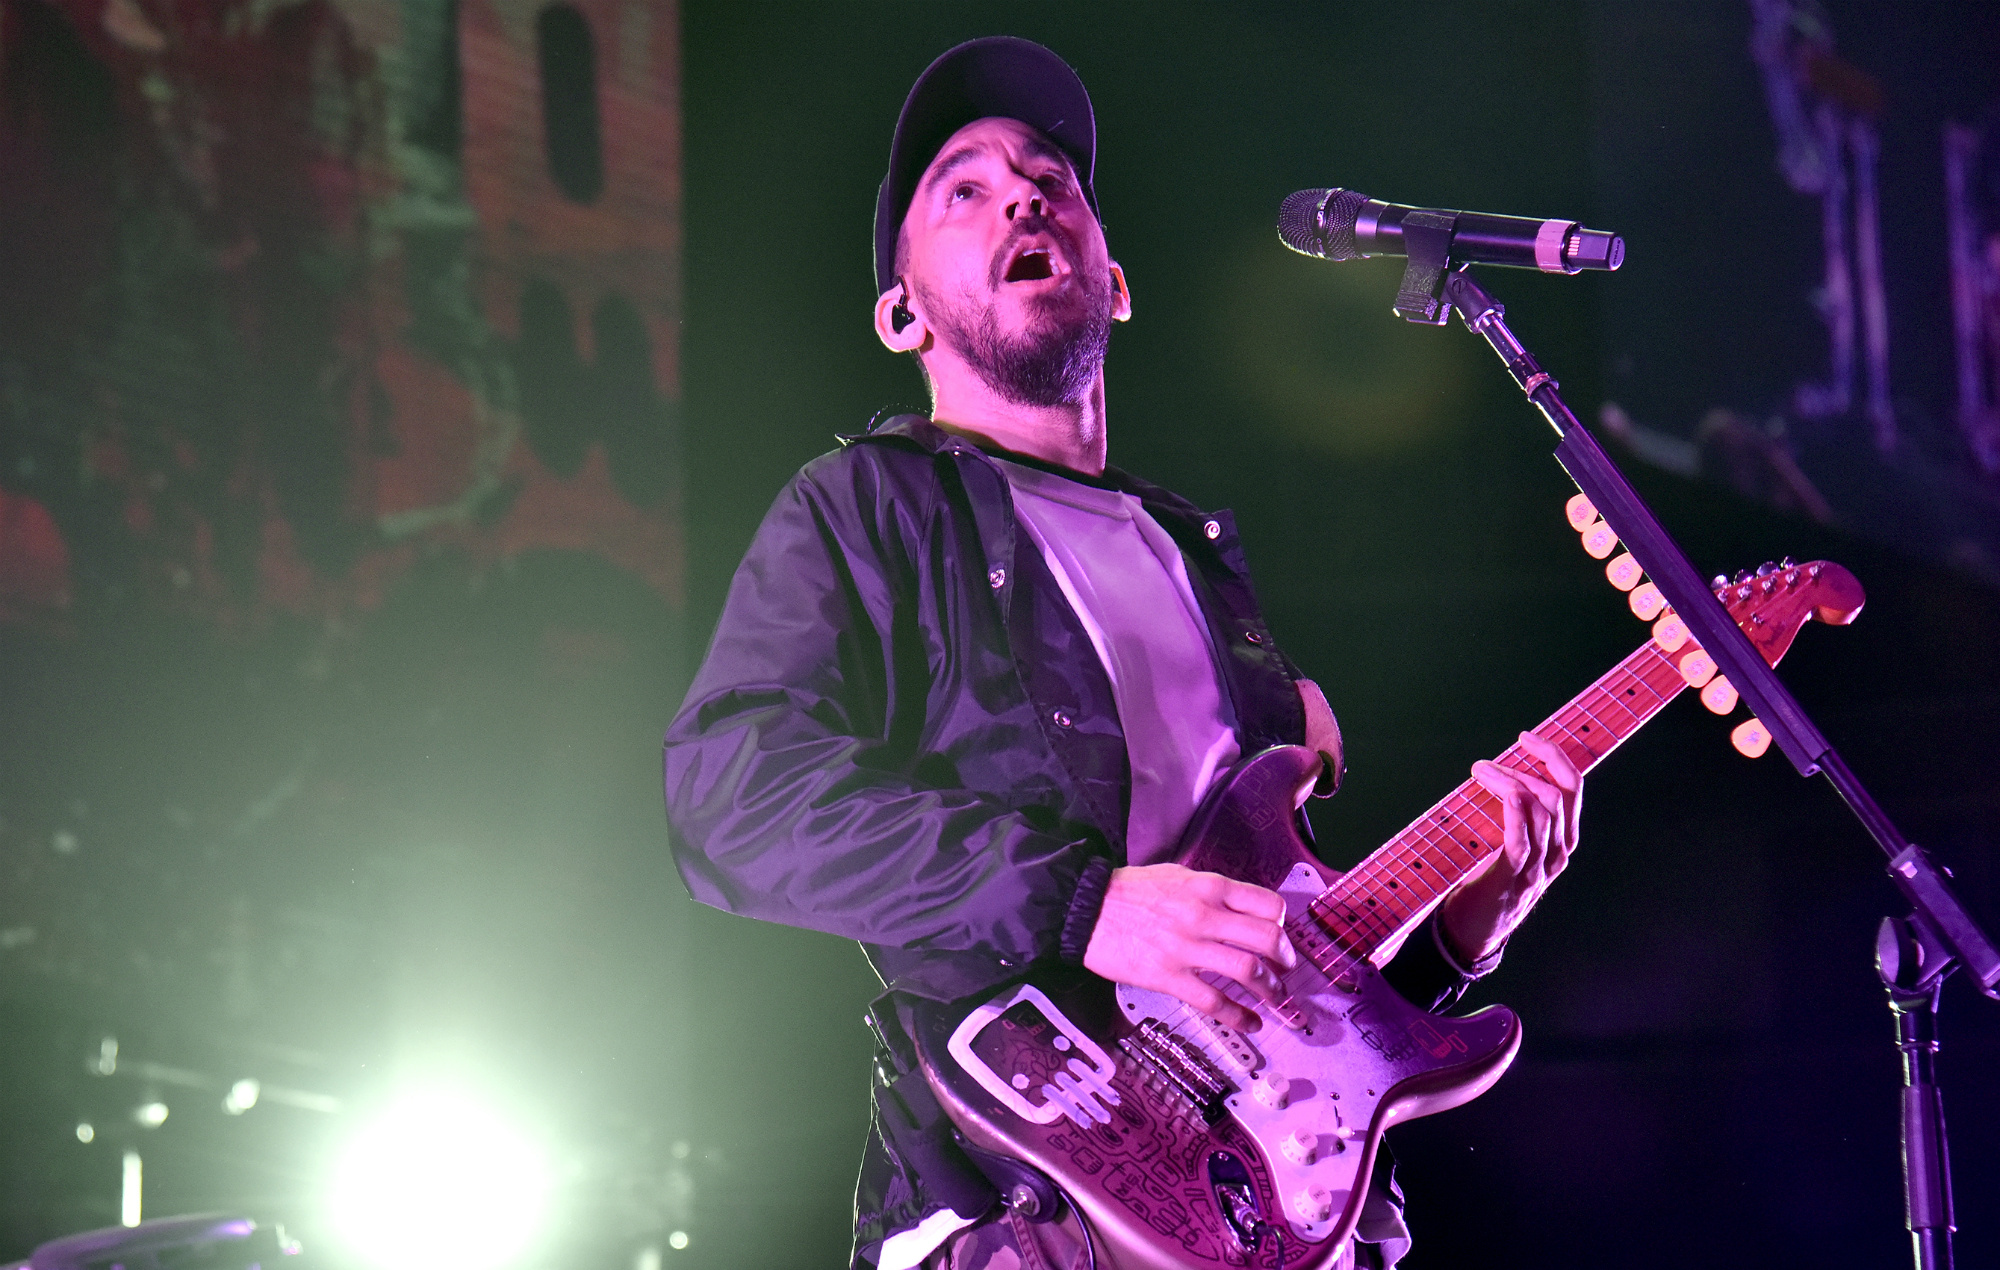 Mike Shinoda on Linkin Park recruiting a new singer: 2000x1270